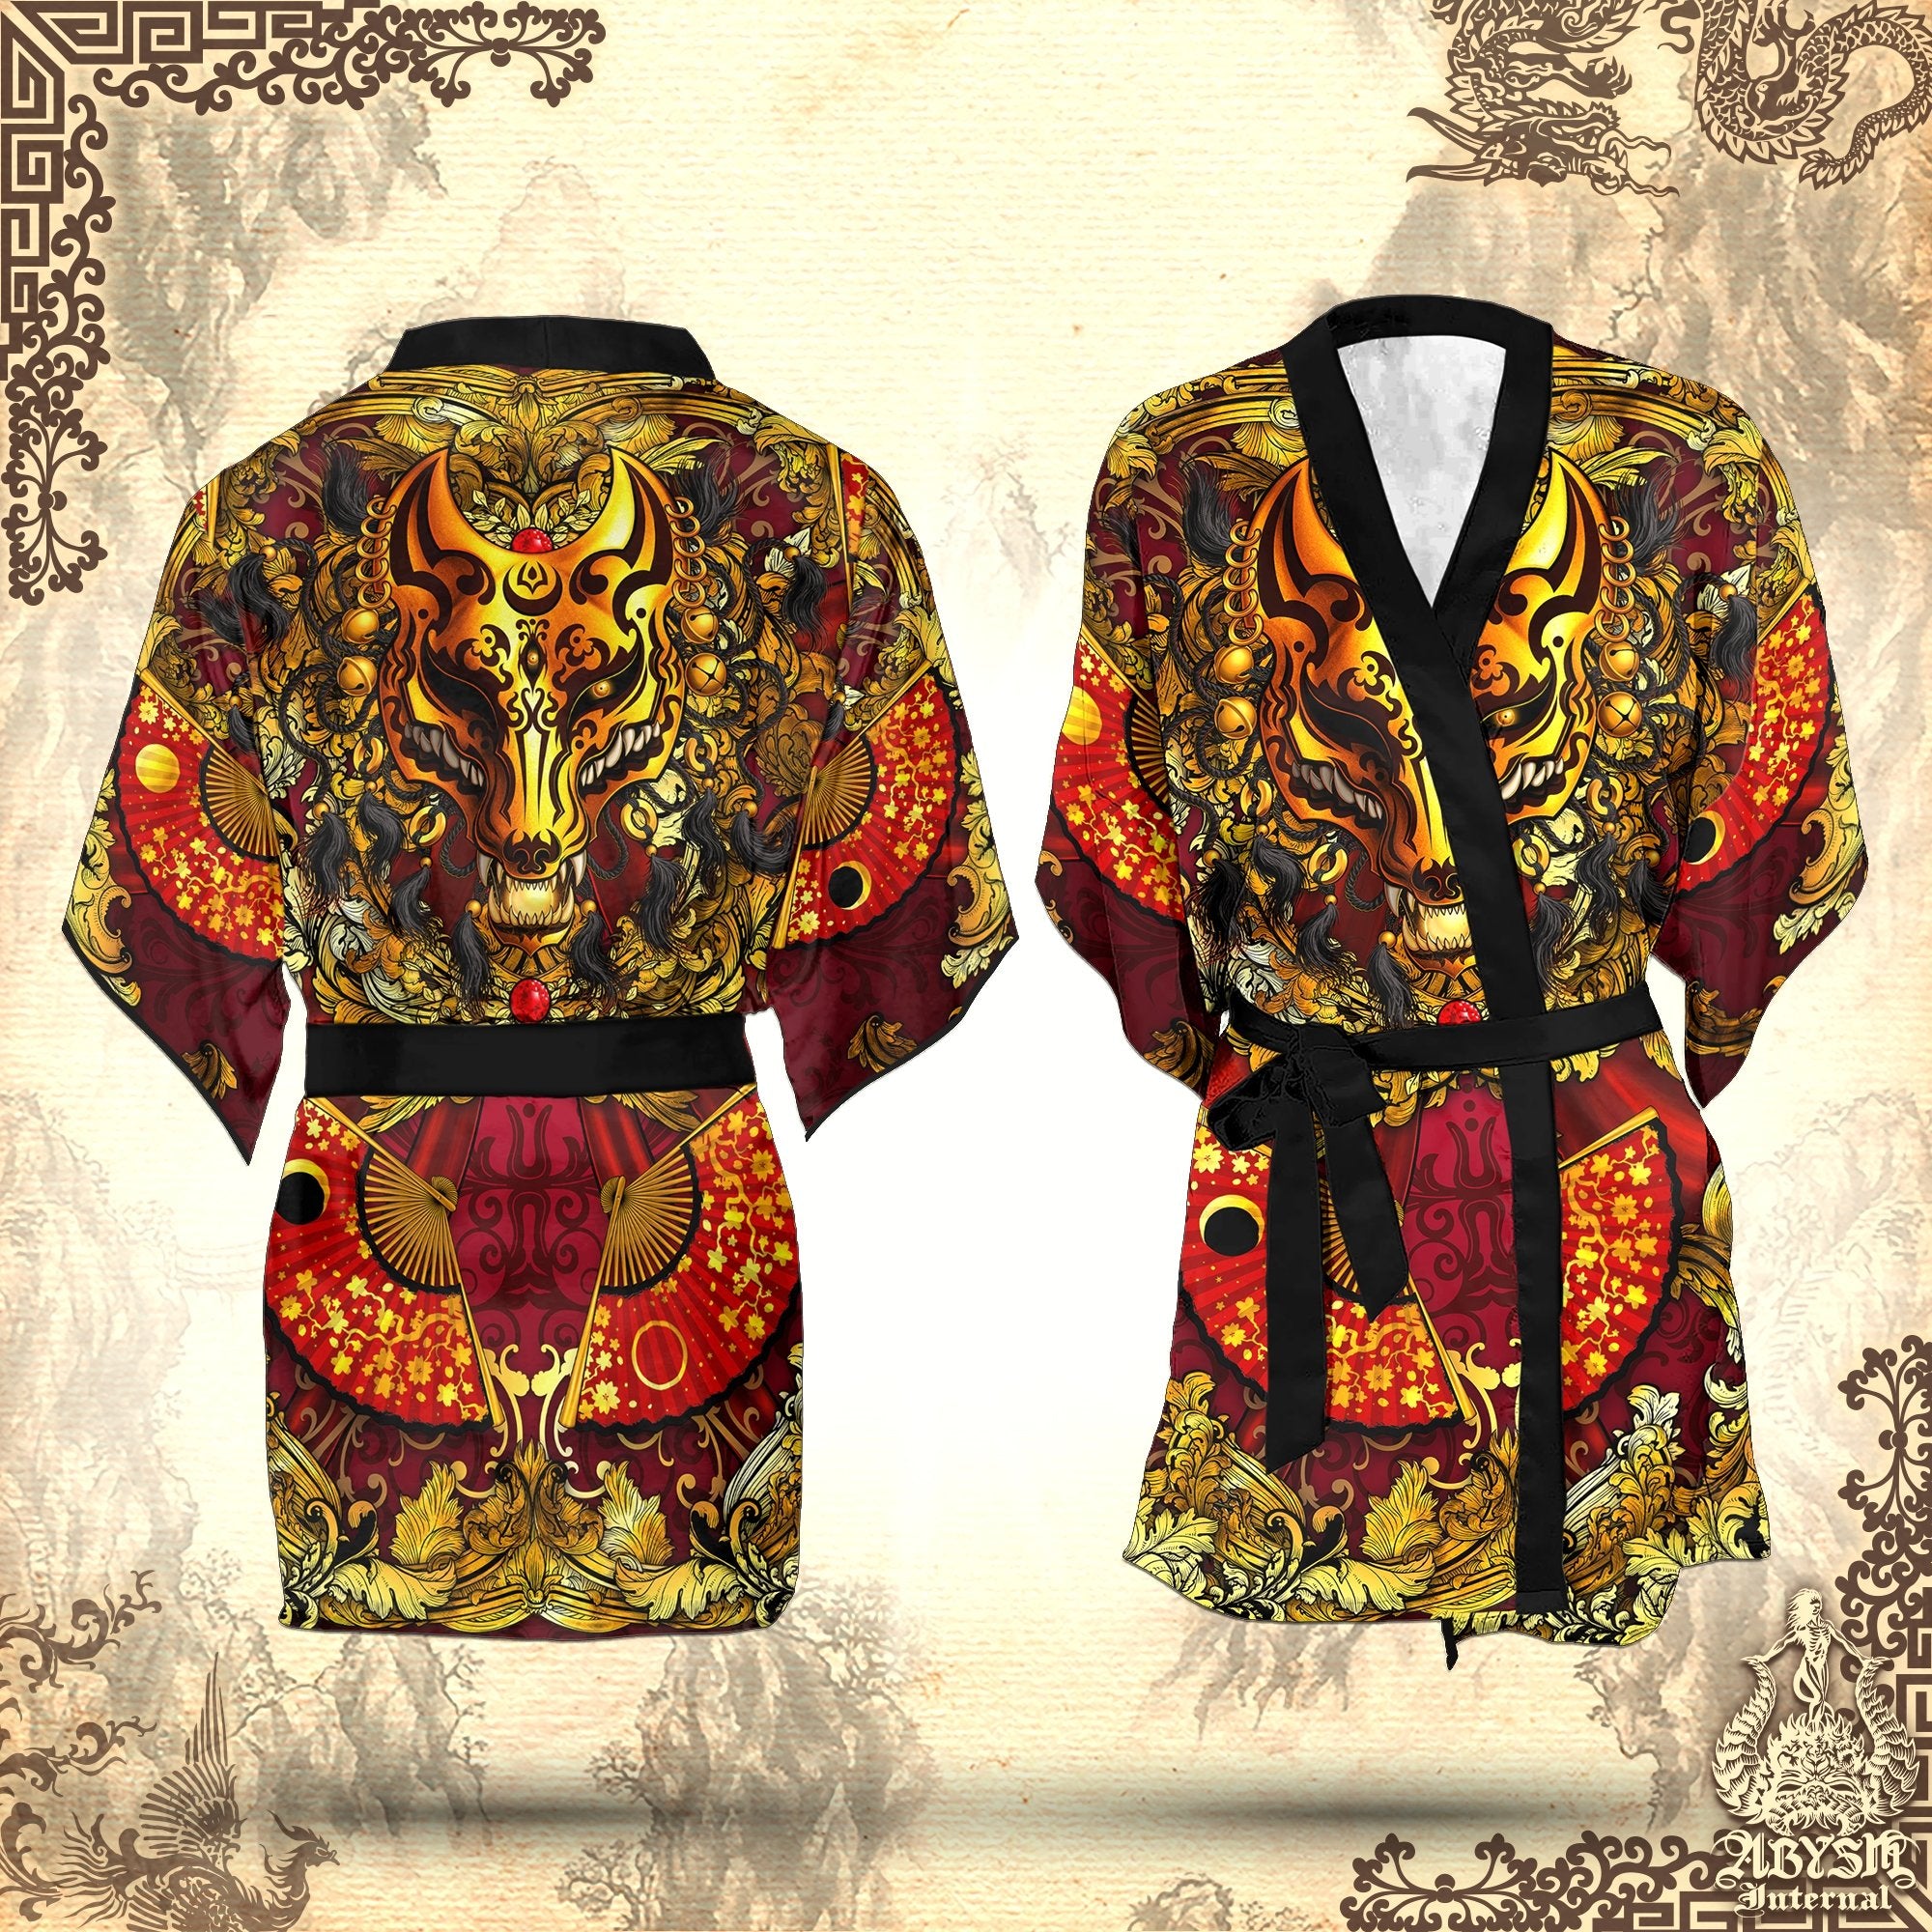 Kitsune Cover Up, Beach Outfit, Japanese Party Kimono, Summer Festival Robe, Indie and Alternative Clothing, Unisex - Fox Mask, Metal Gold - Abysm Internal